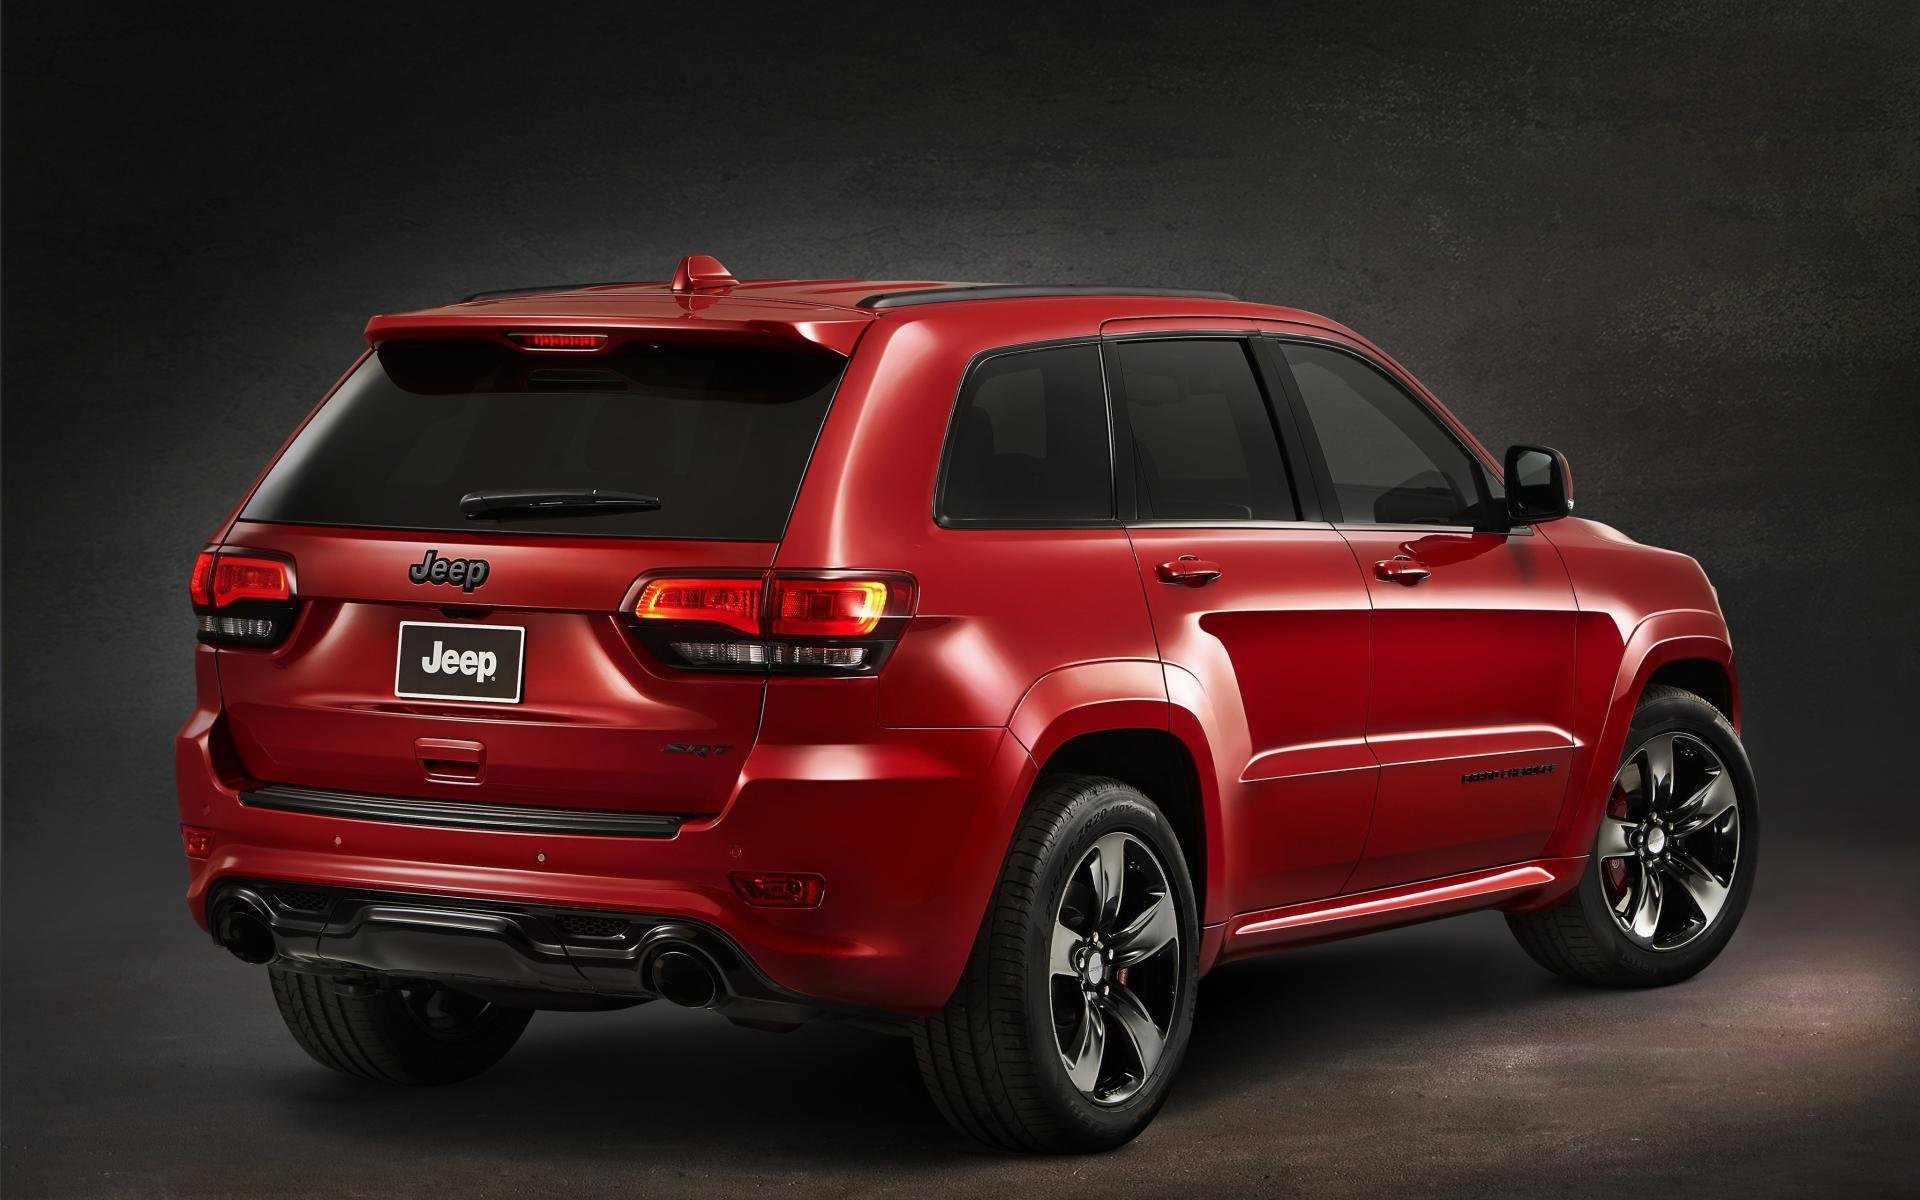 Best Jeep Grand Cherokee wallpaper ID:42741 for High Resolution hd 1920x1200 computer